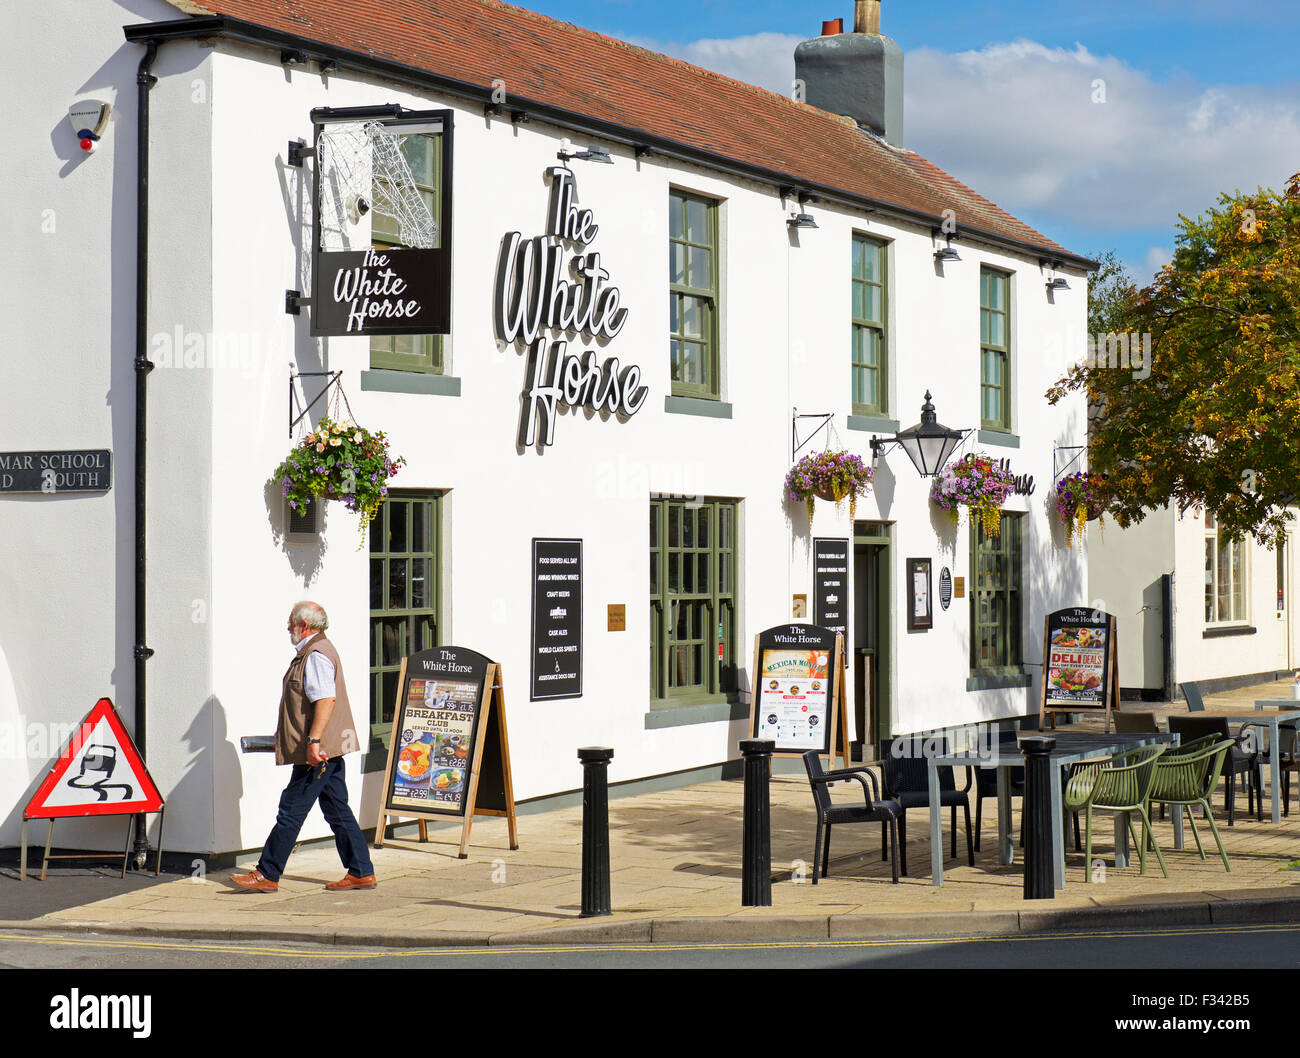 Wetherspoons pub - the White Horse - in Brigg, North Lincolnshire, England UK Stock Photo